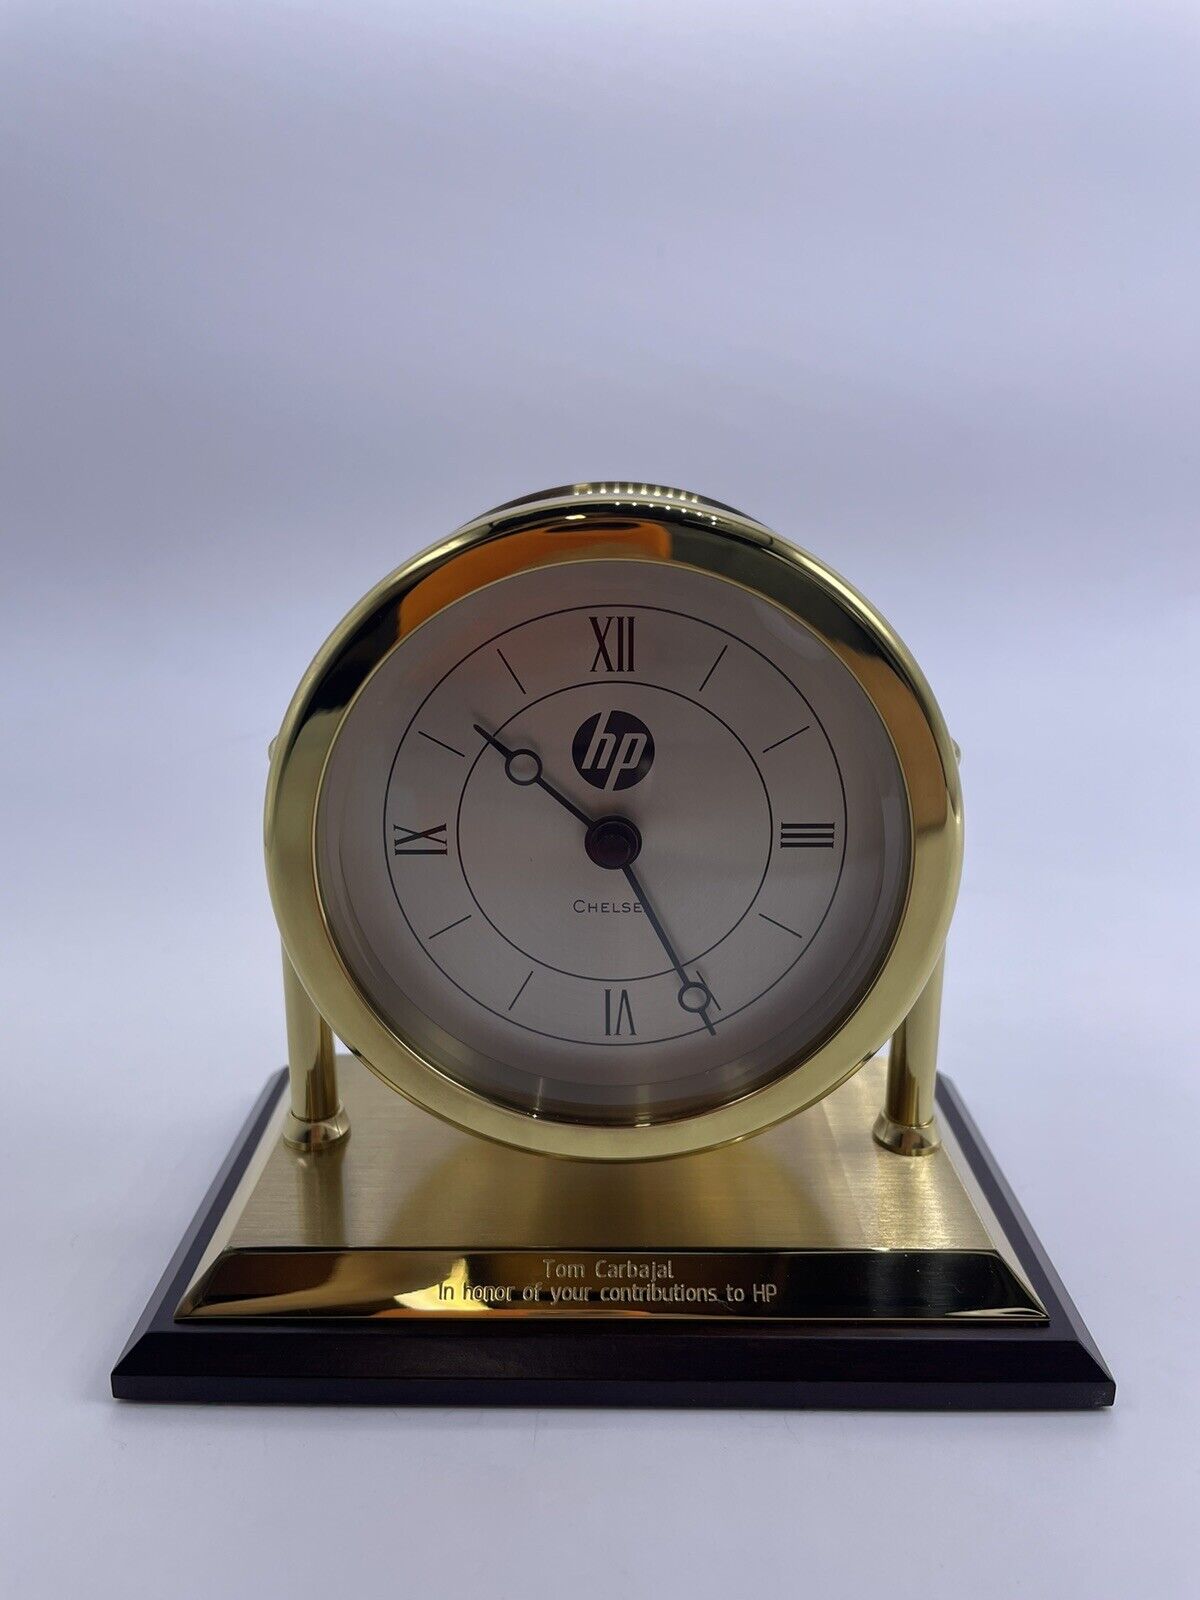 Chelsea Chatham desk clock Working Condition Presentation Piece From HP Company